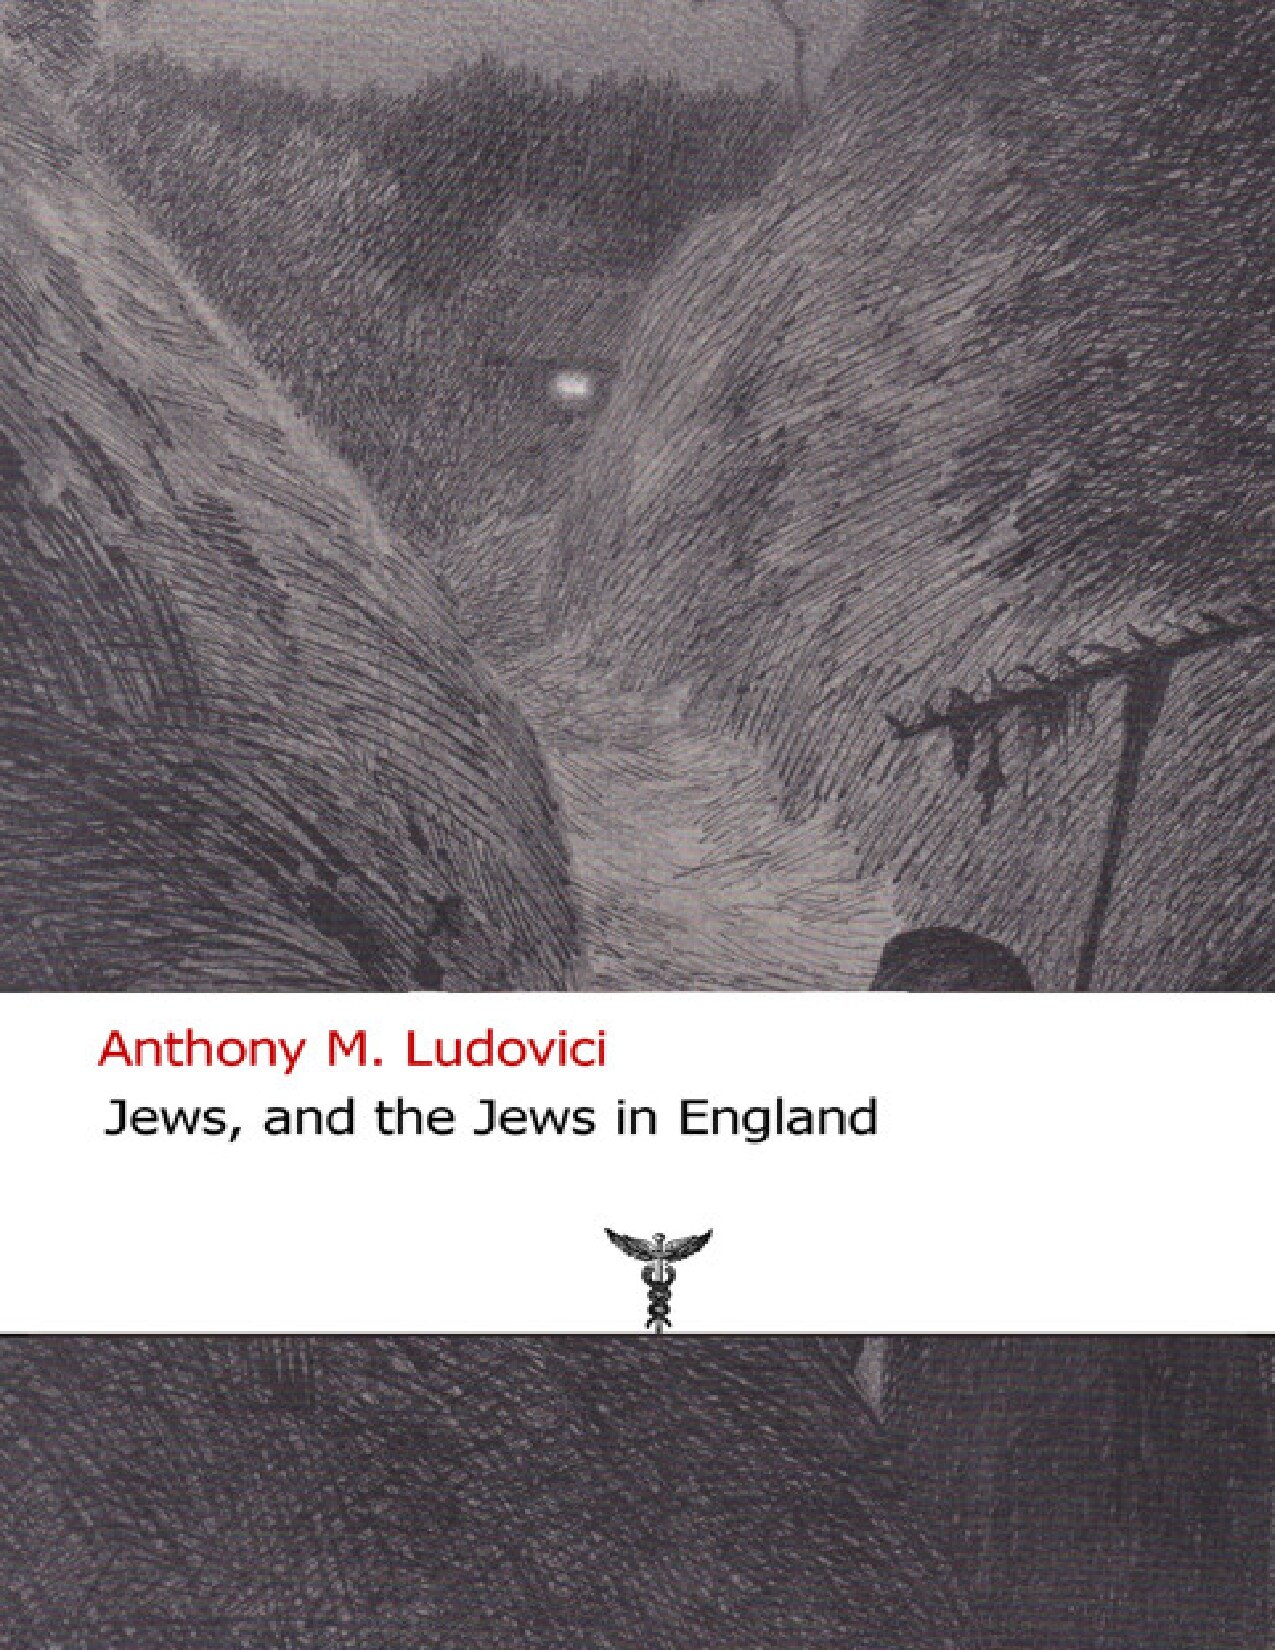 Jews, and the Jews in England